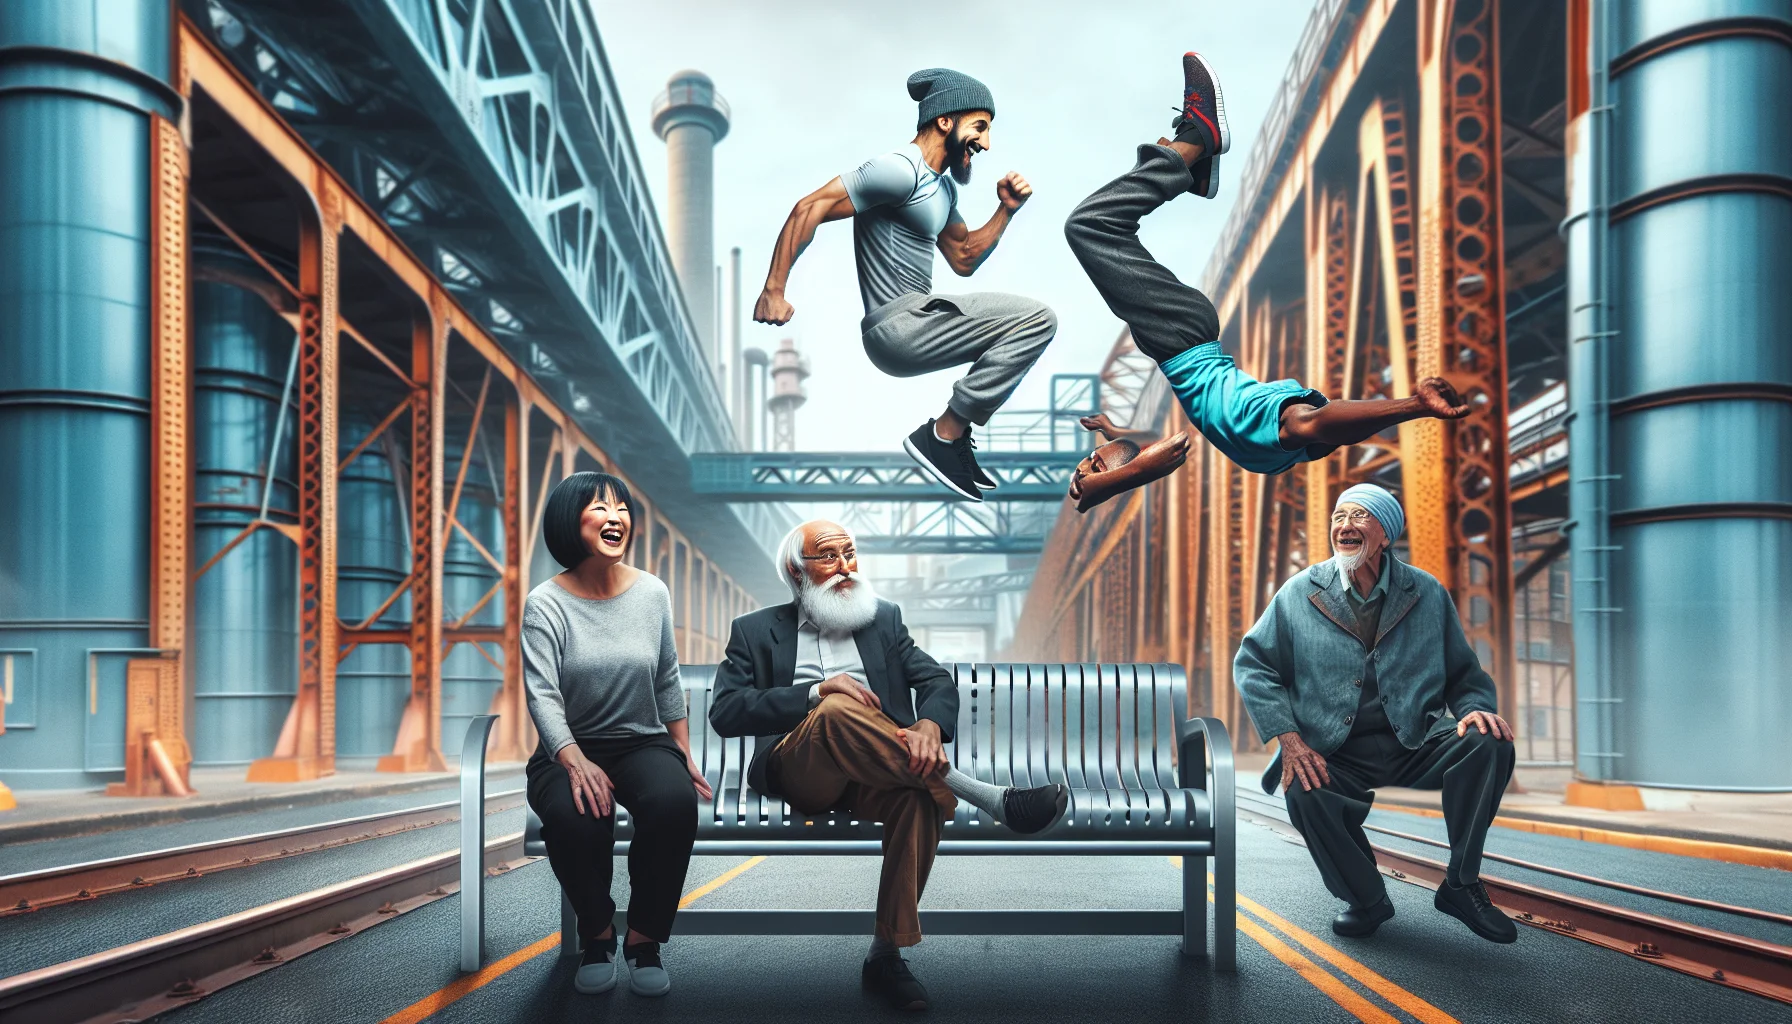 Create a vibrant and realistic image capturing an amusing scene of city parkour in an industrial steel city. Imagine a Hispanic male flipping agilely over a bench with a playful grin, a Black female balancing expertly on a handrail, her laughter infectious, and a Middle-Eastern elderly man attempting an ambitious leap over a steel barrier, his determined expression adding to the humor. Use this intriguing display of athleticism and humor to inspire viewers to consider the fun side of exercise.